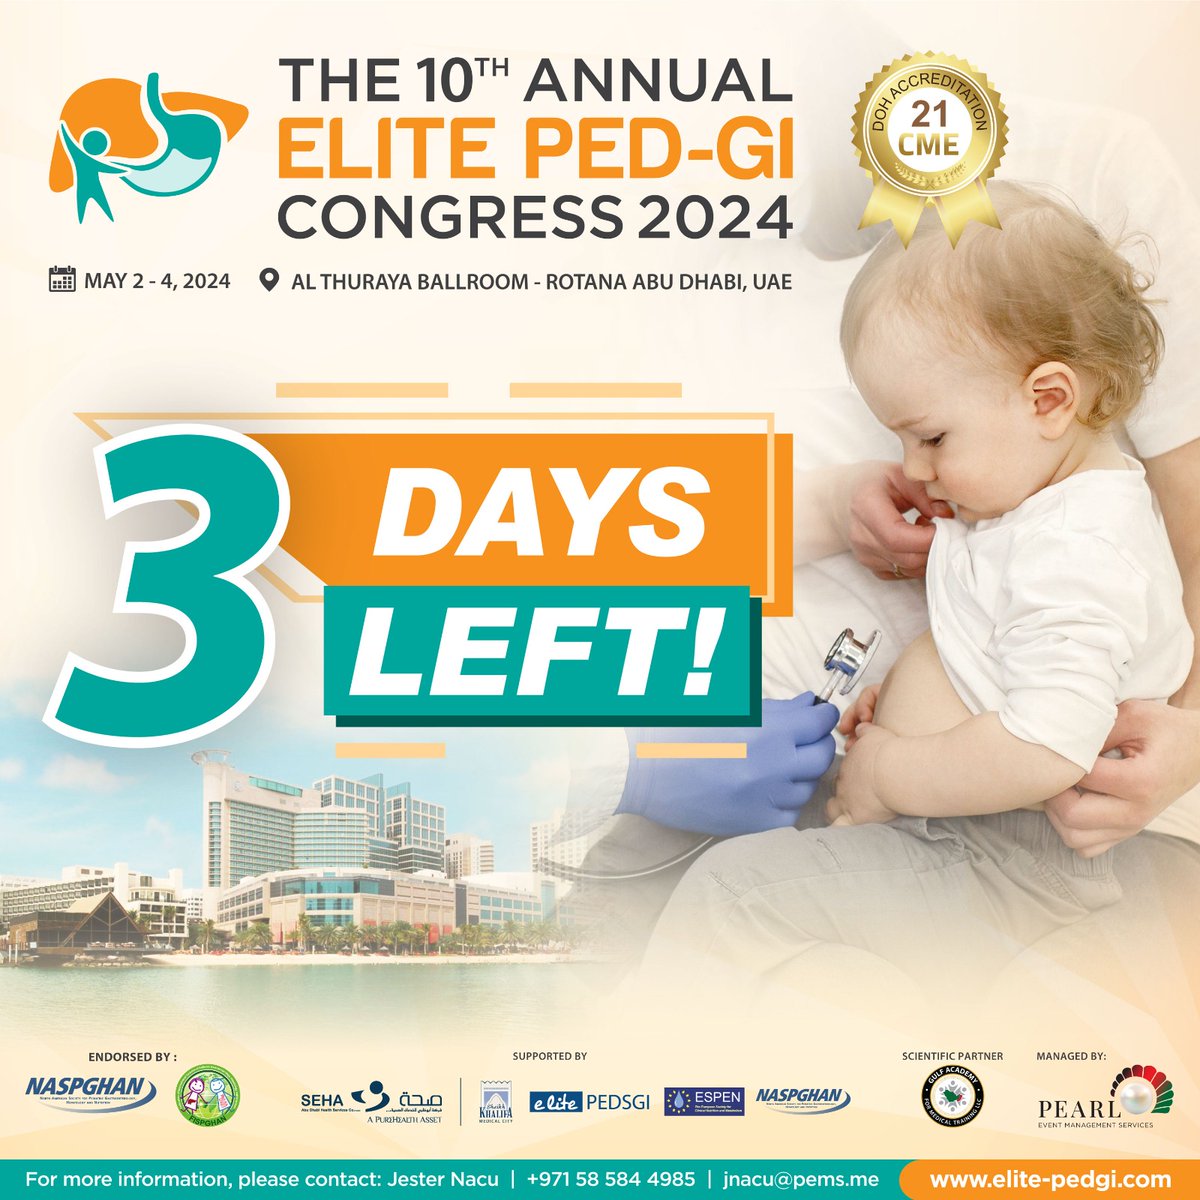 It is our pleasure to invite you to attend The 10th Annual ELITE PED-GI Congress 2024, endorsed by NASPGHAN and FISPGHAN, that will be held on May 2 - 4, 2024 in Al Thuraya Ballroom - Rotana Abu Dhabi, United Arab Emirates.

#3daysleft #RegisterNow

elite-pedgi.com/register